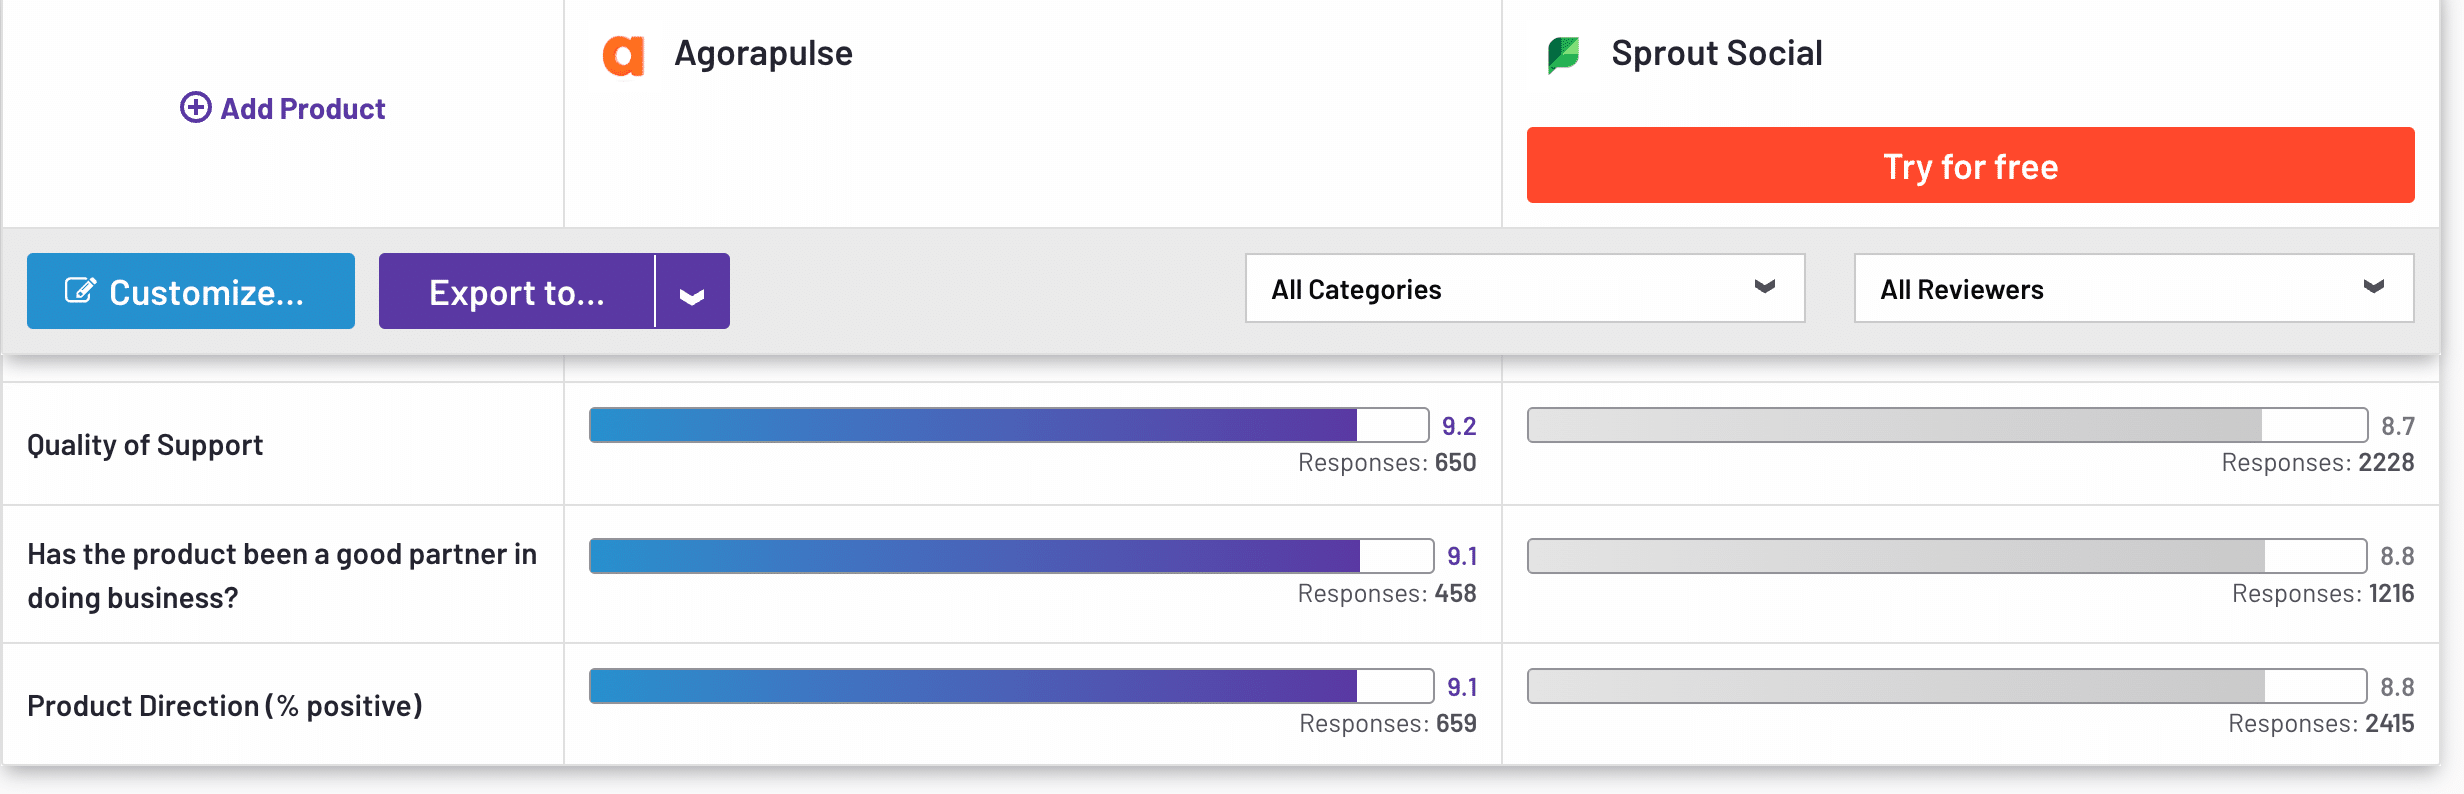 comparison of quality of support between agorapulse vs sprout social